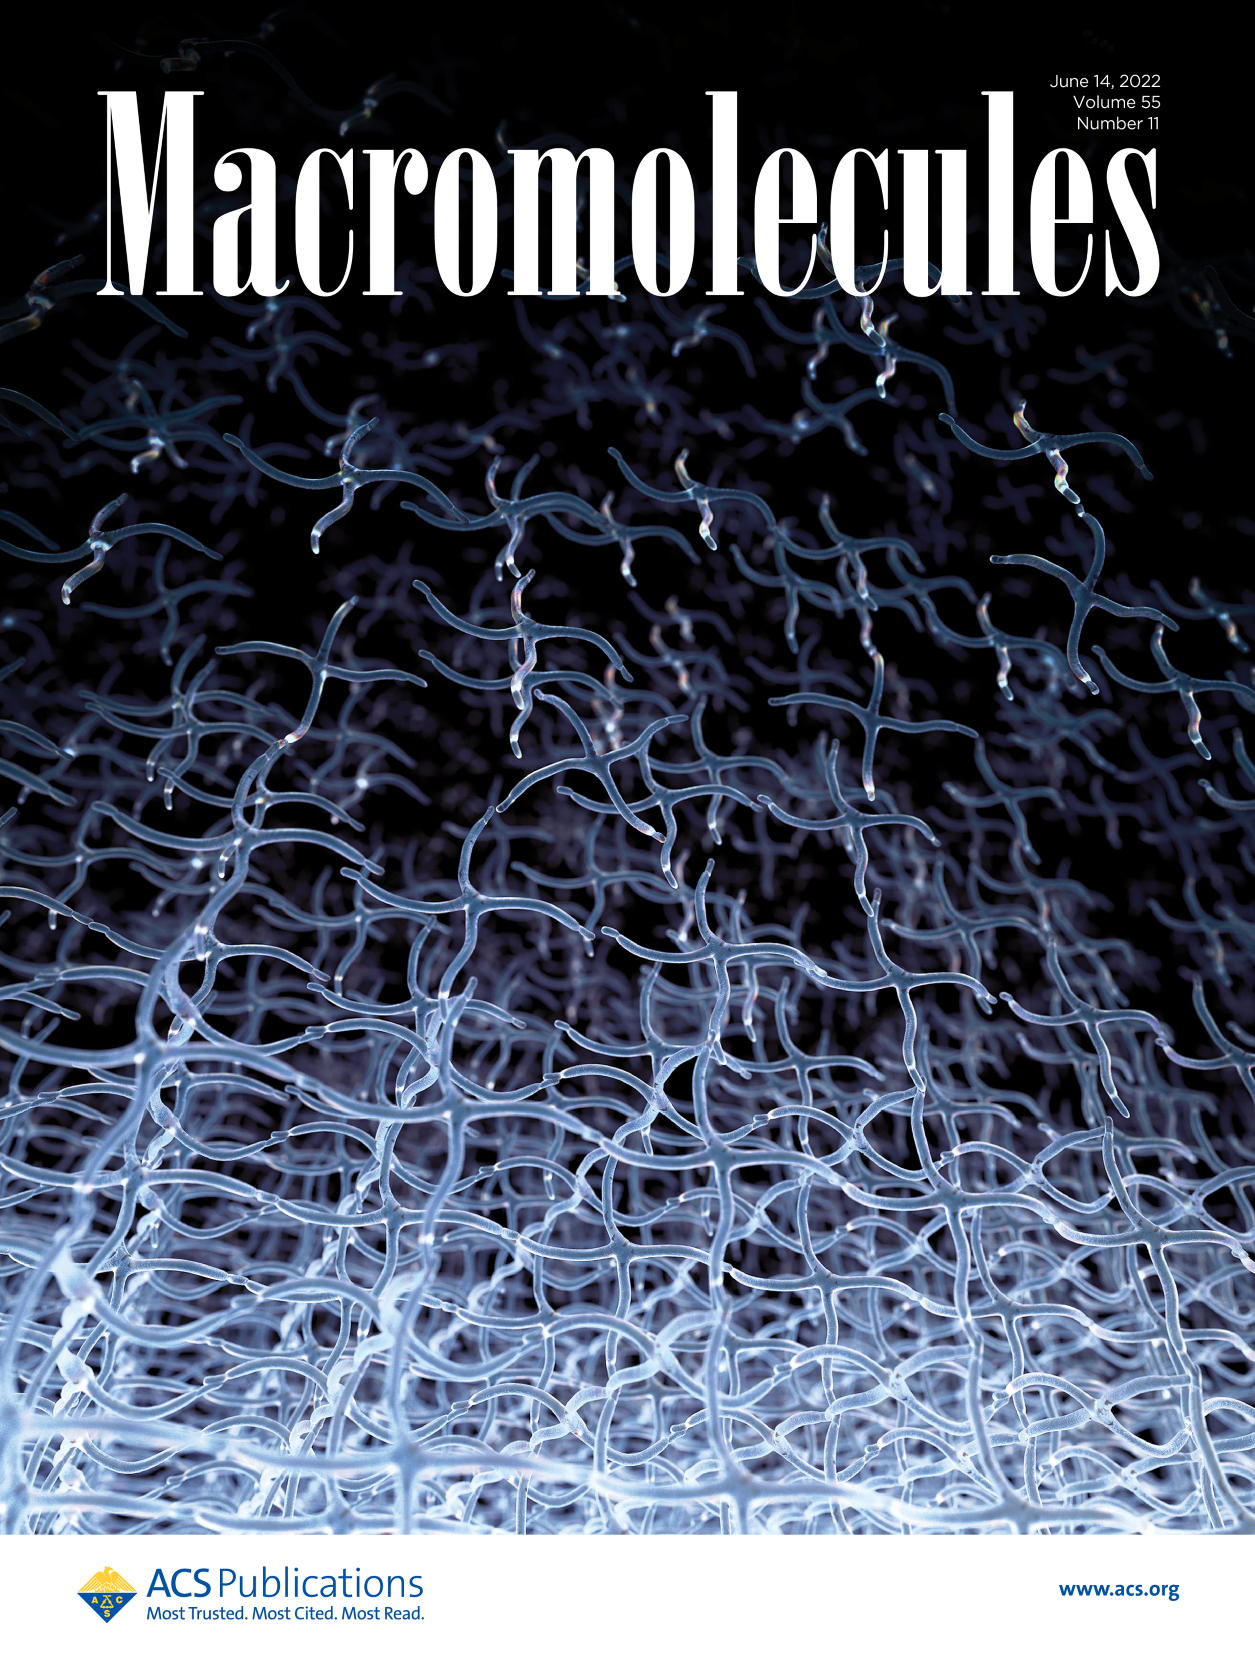 Cover of Macromolecules with illustration by Sayo Studio